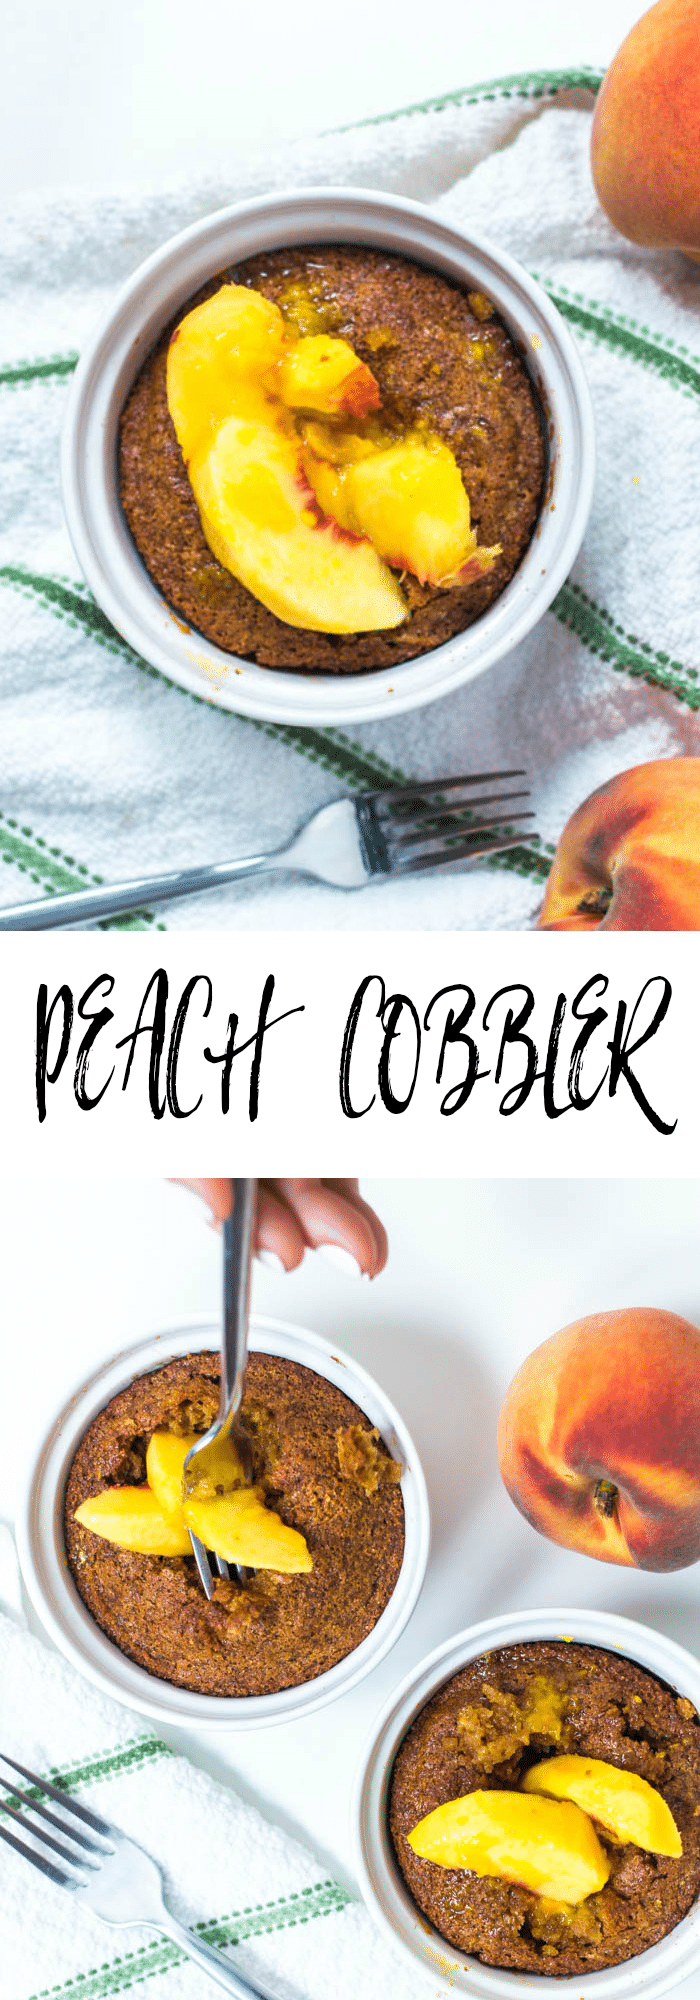 Easy Peach Cobbler recipe with fresh peaches - these are homemade mini cobblers made in ramekins made in the oven with sugar and flour